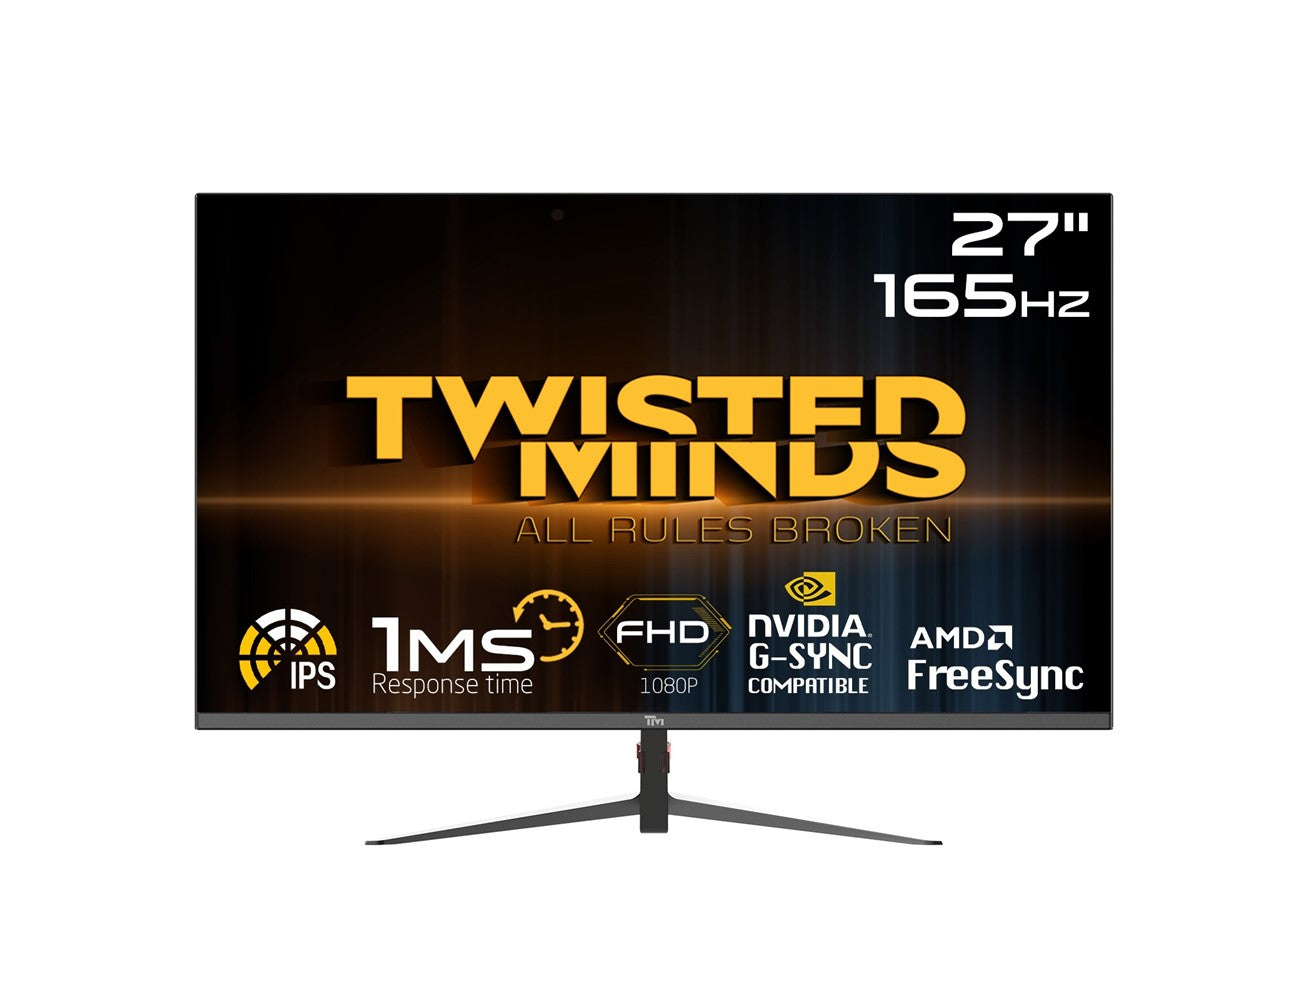 Twisted Minds 27'', 165Hz, 1ms, Gaming Monitor